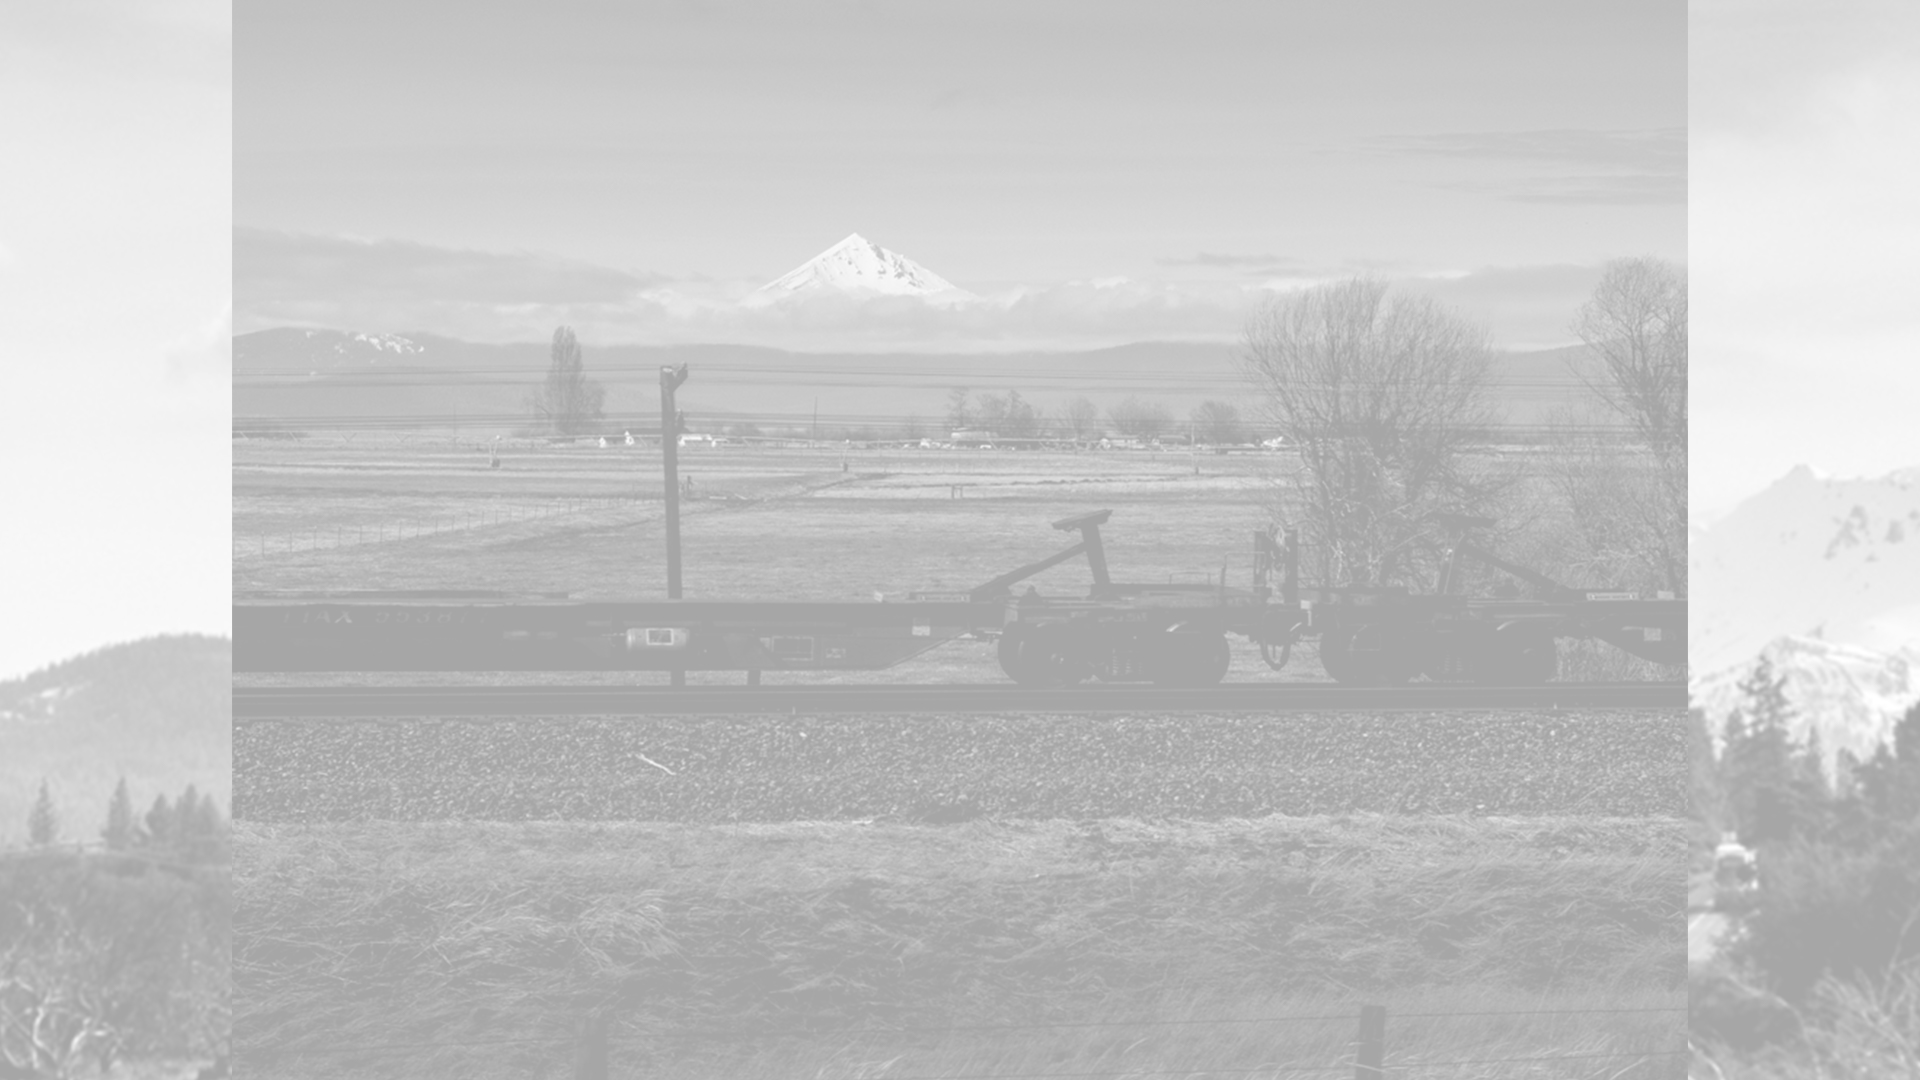 mount shasta as seen by the state of jefferson, train cars, black and white